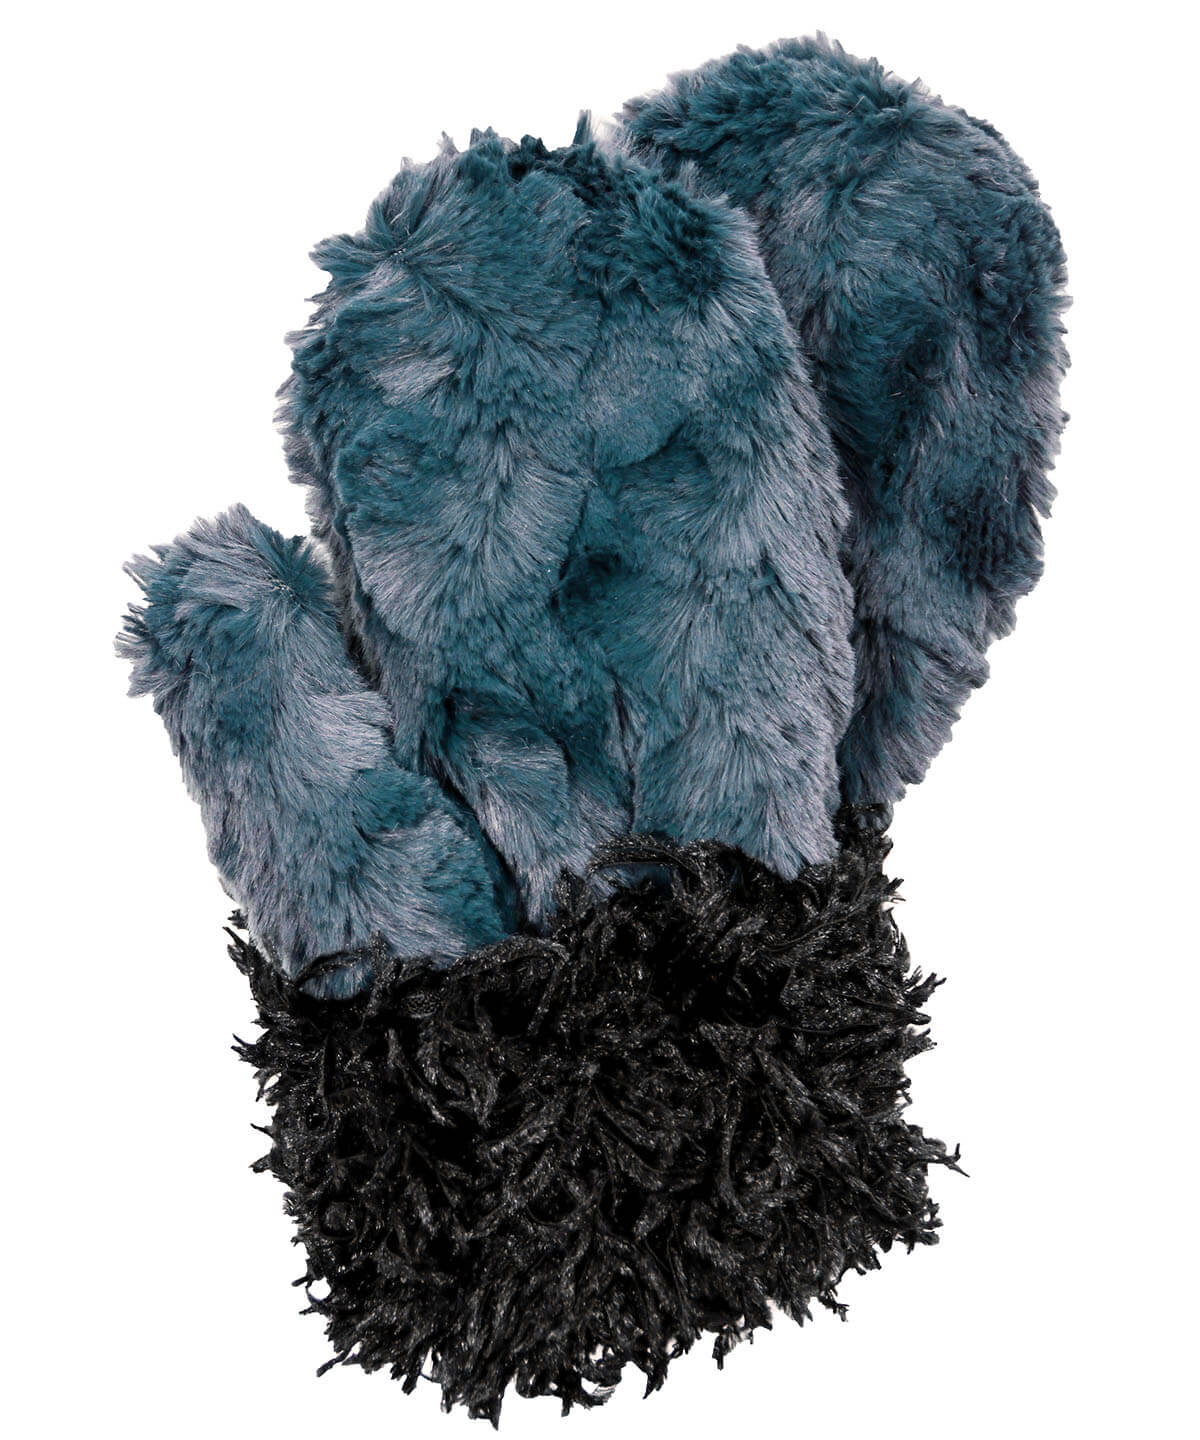 Women’s Product shot of Mittens. Gauntlets, Mitts | Peacock Pond with Black swan, blue faux fur | Handmade by Pandemonium Millinery Seattle, WA USA